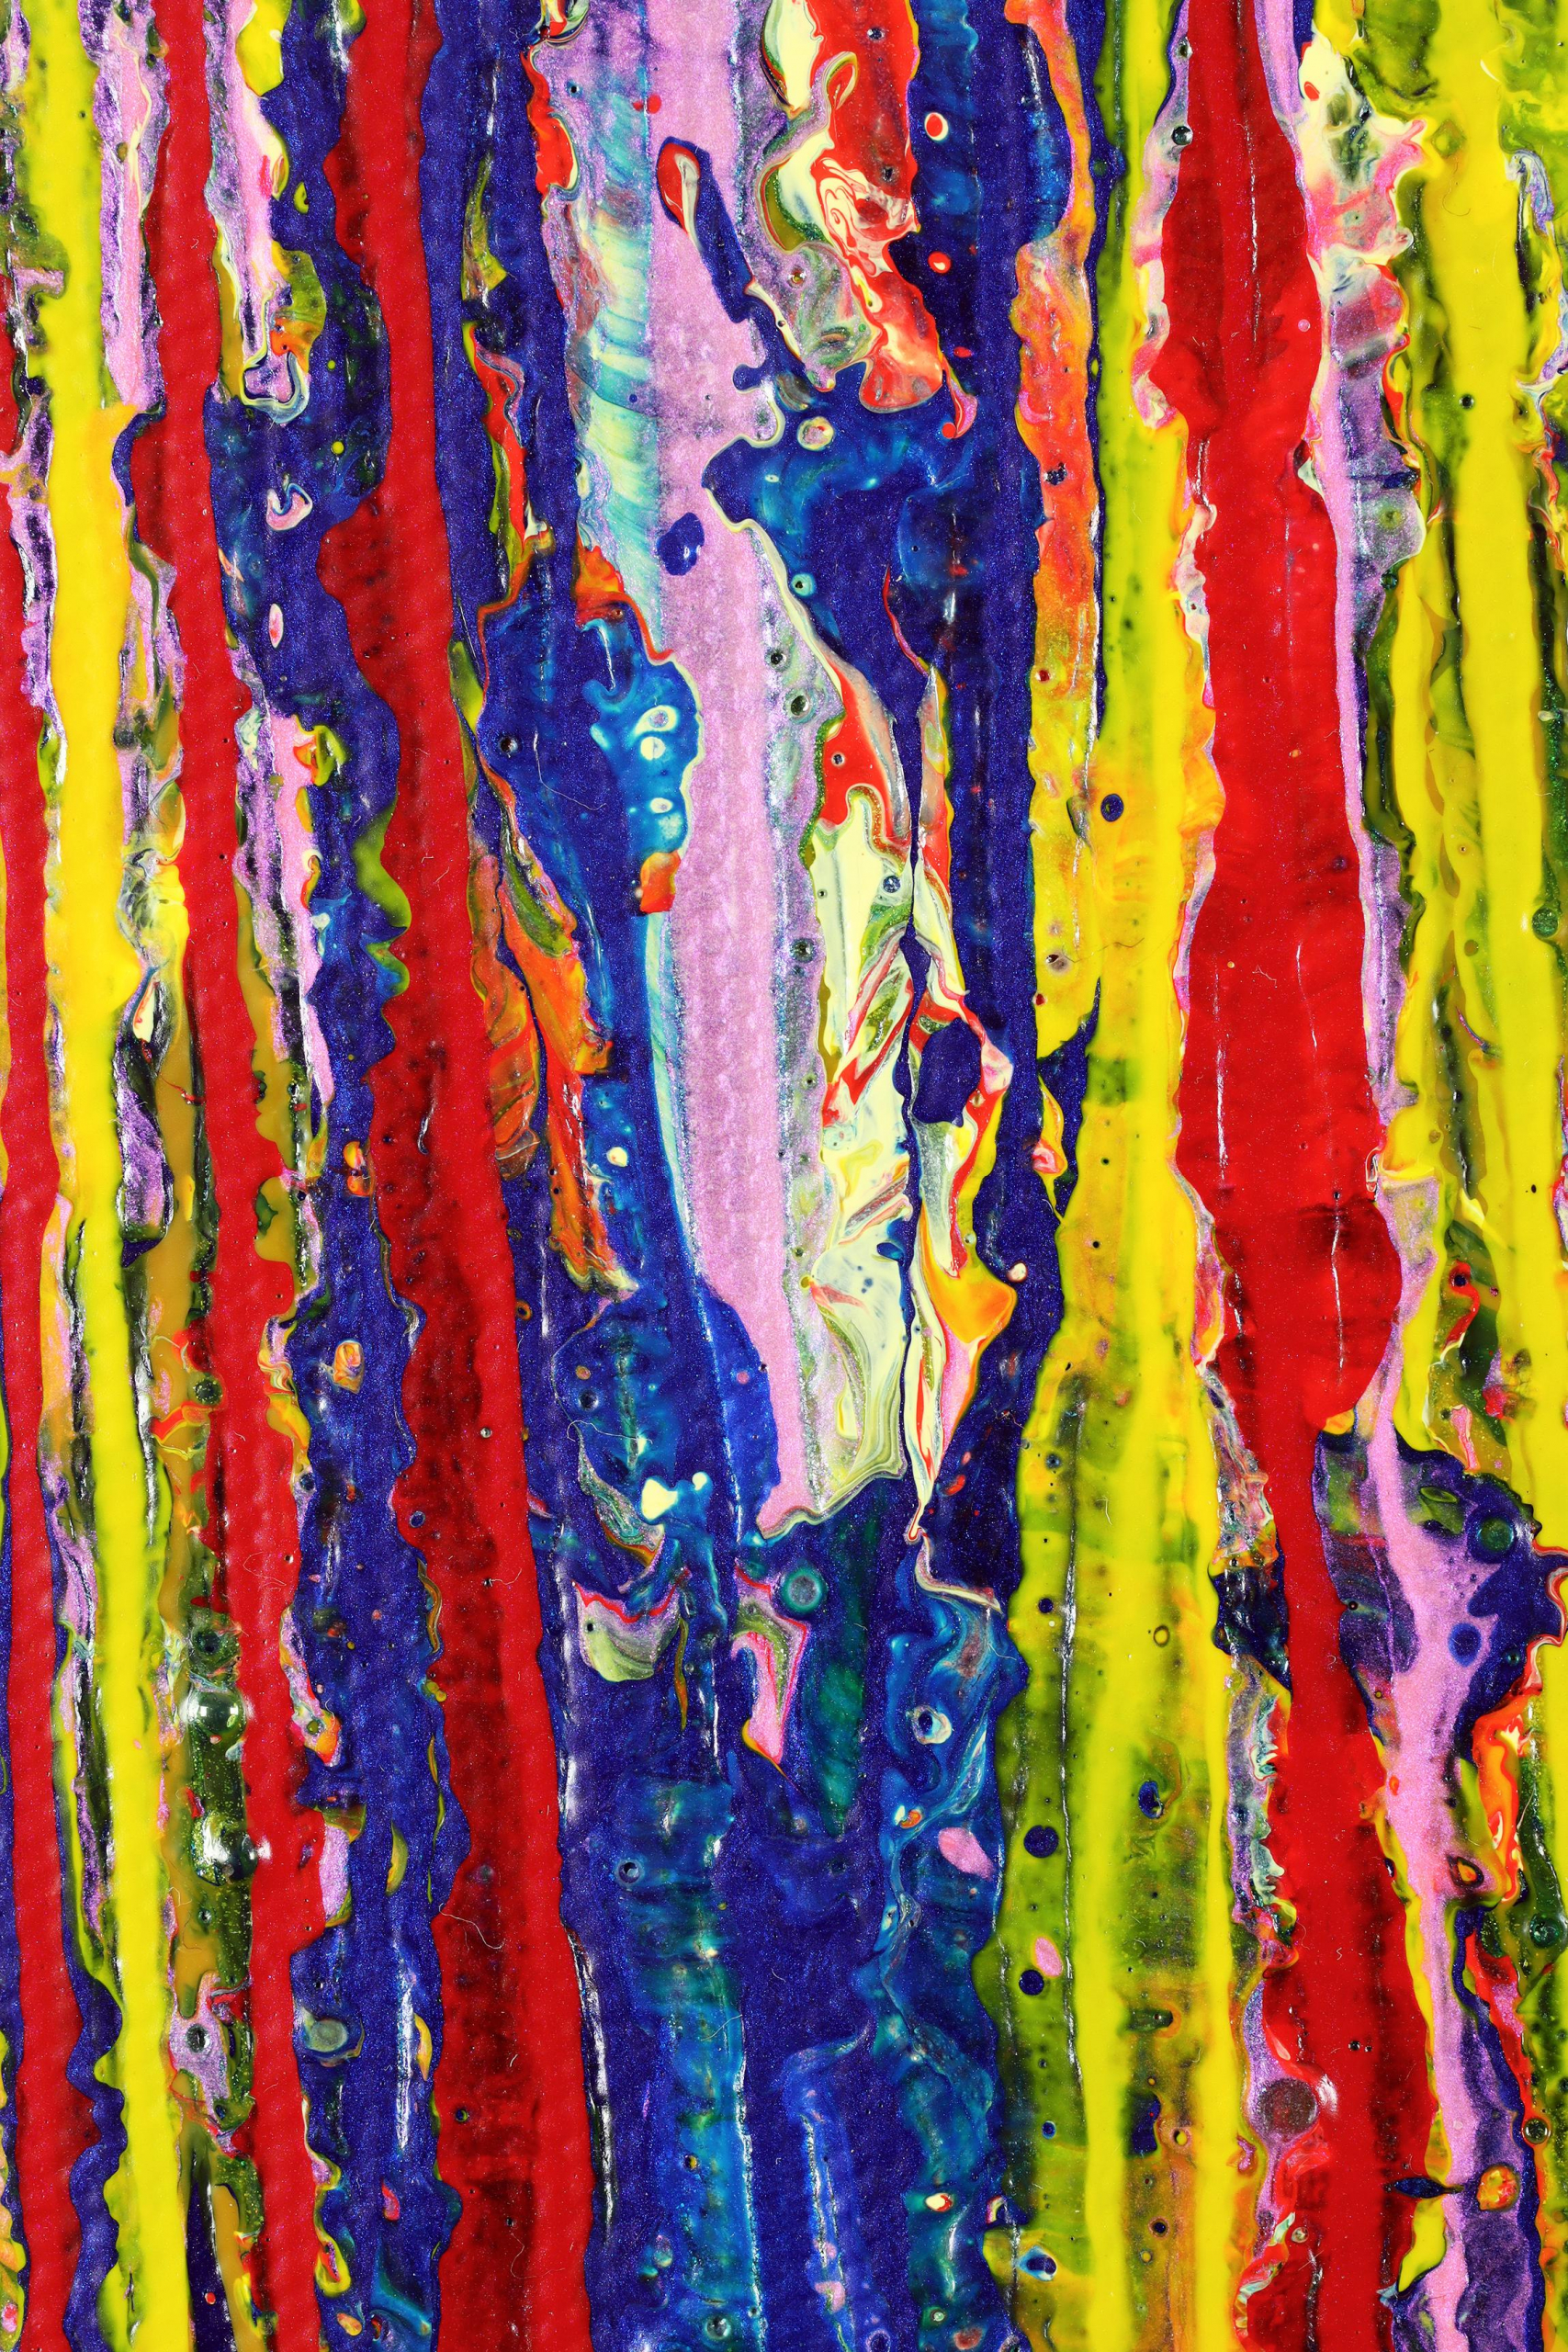 SOLD / DETAIL / Strange Spectra 3 (2022) / 36X36 INCHES / SOLD ABSTRACT ART